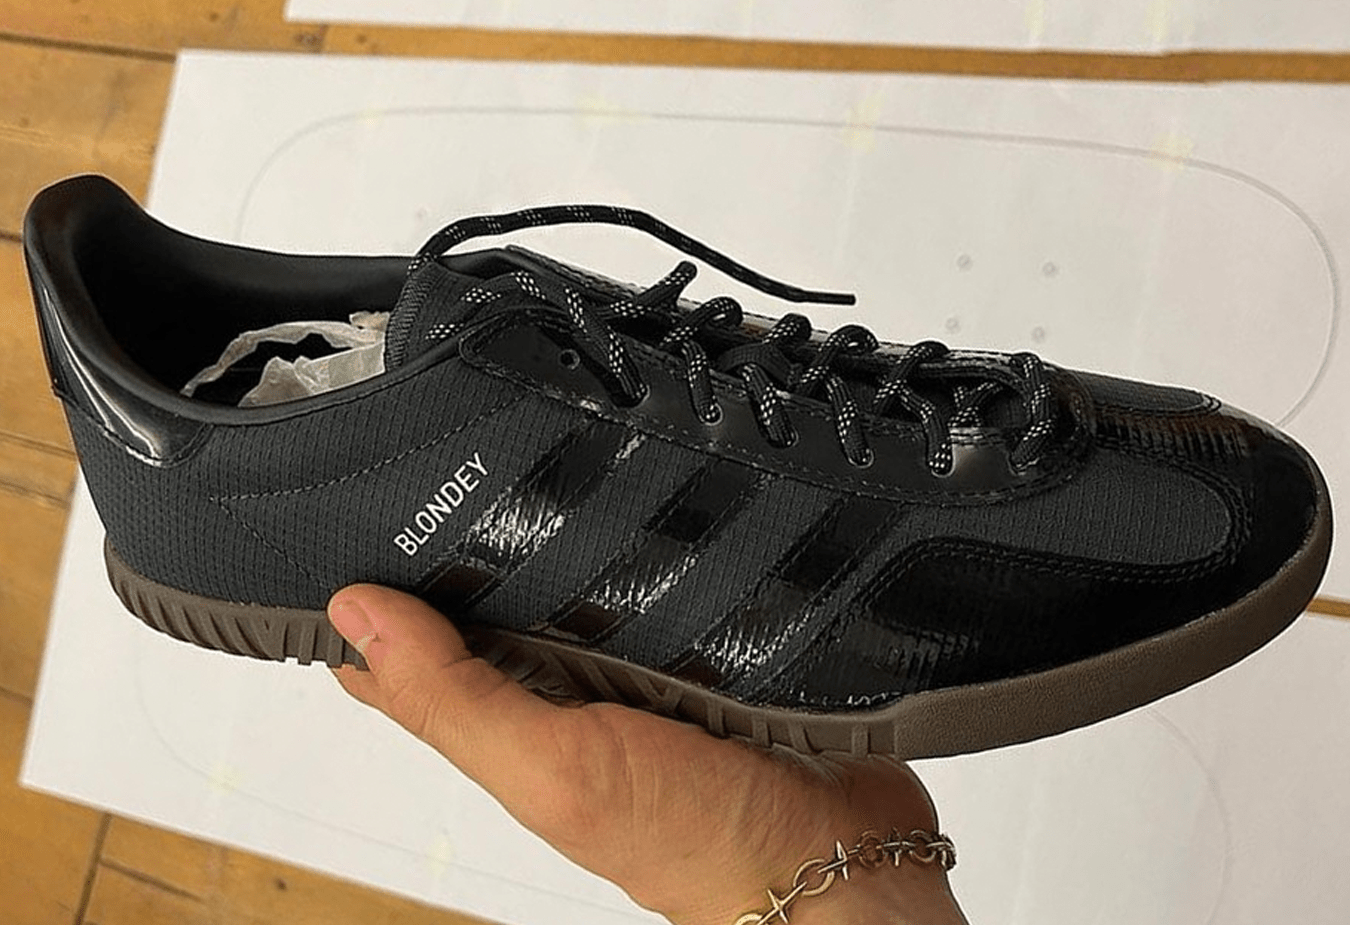 Blondey McCoy Leaked His Sneaker Silhouette with Adidasondey_cover